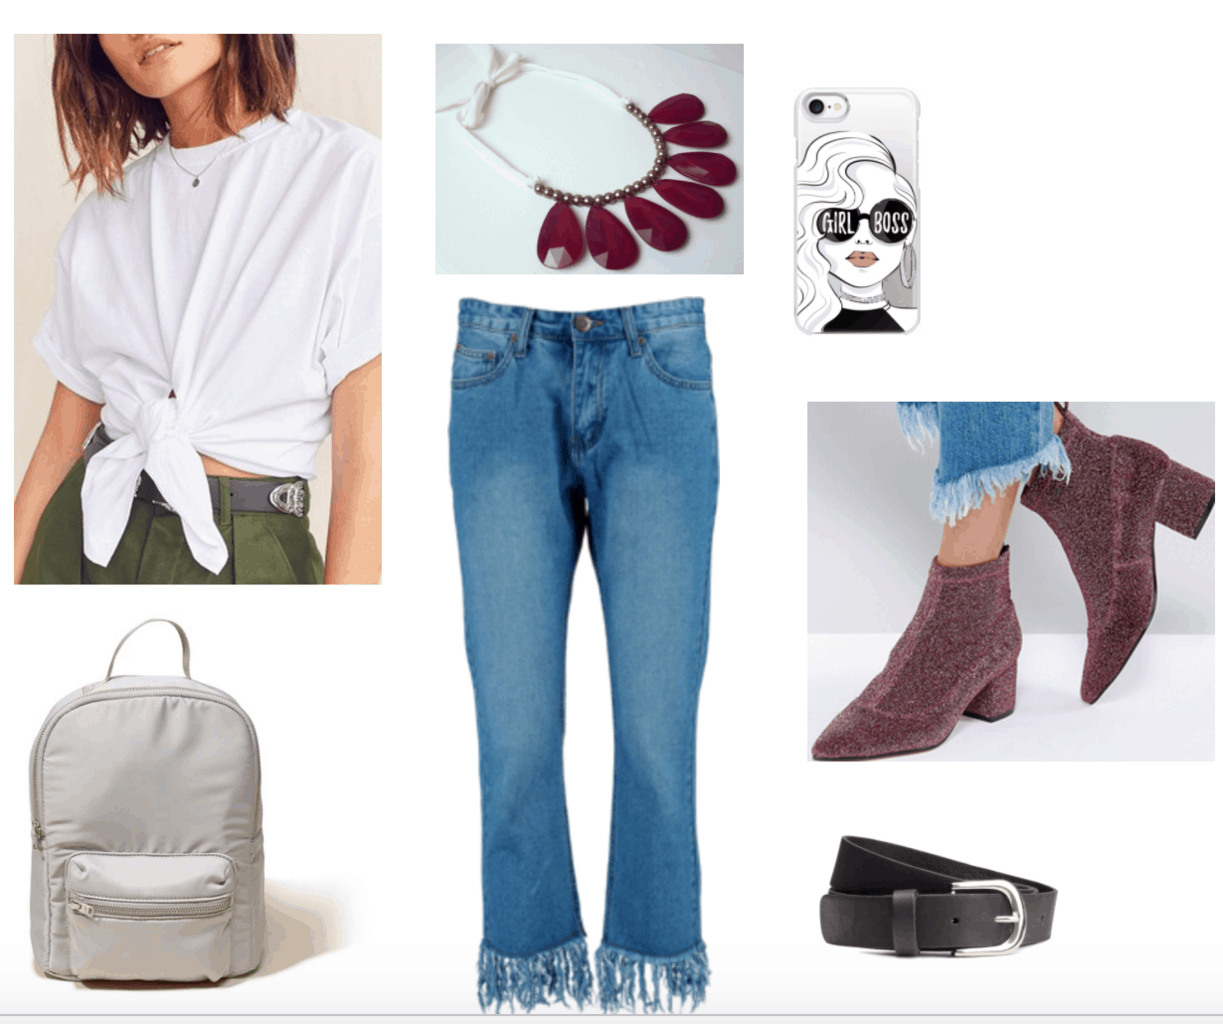 Still Not Sure What to Wear With Sock Boots? Here Are 19 Ideas